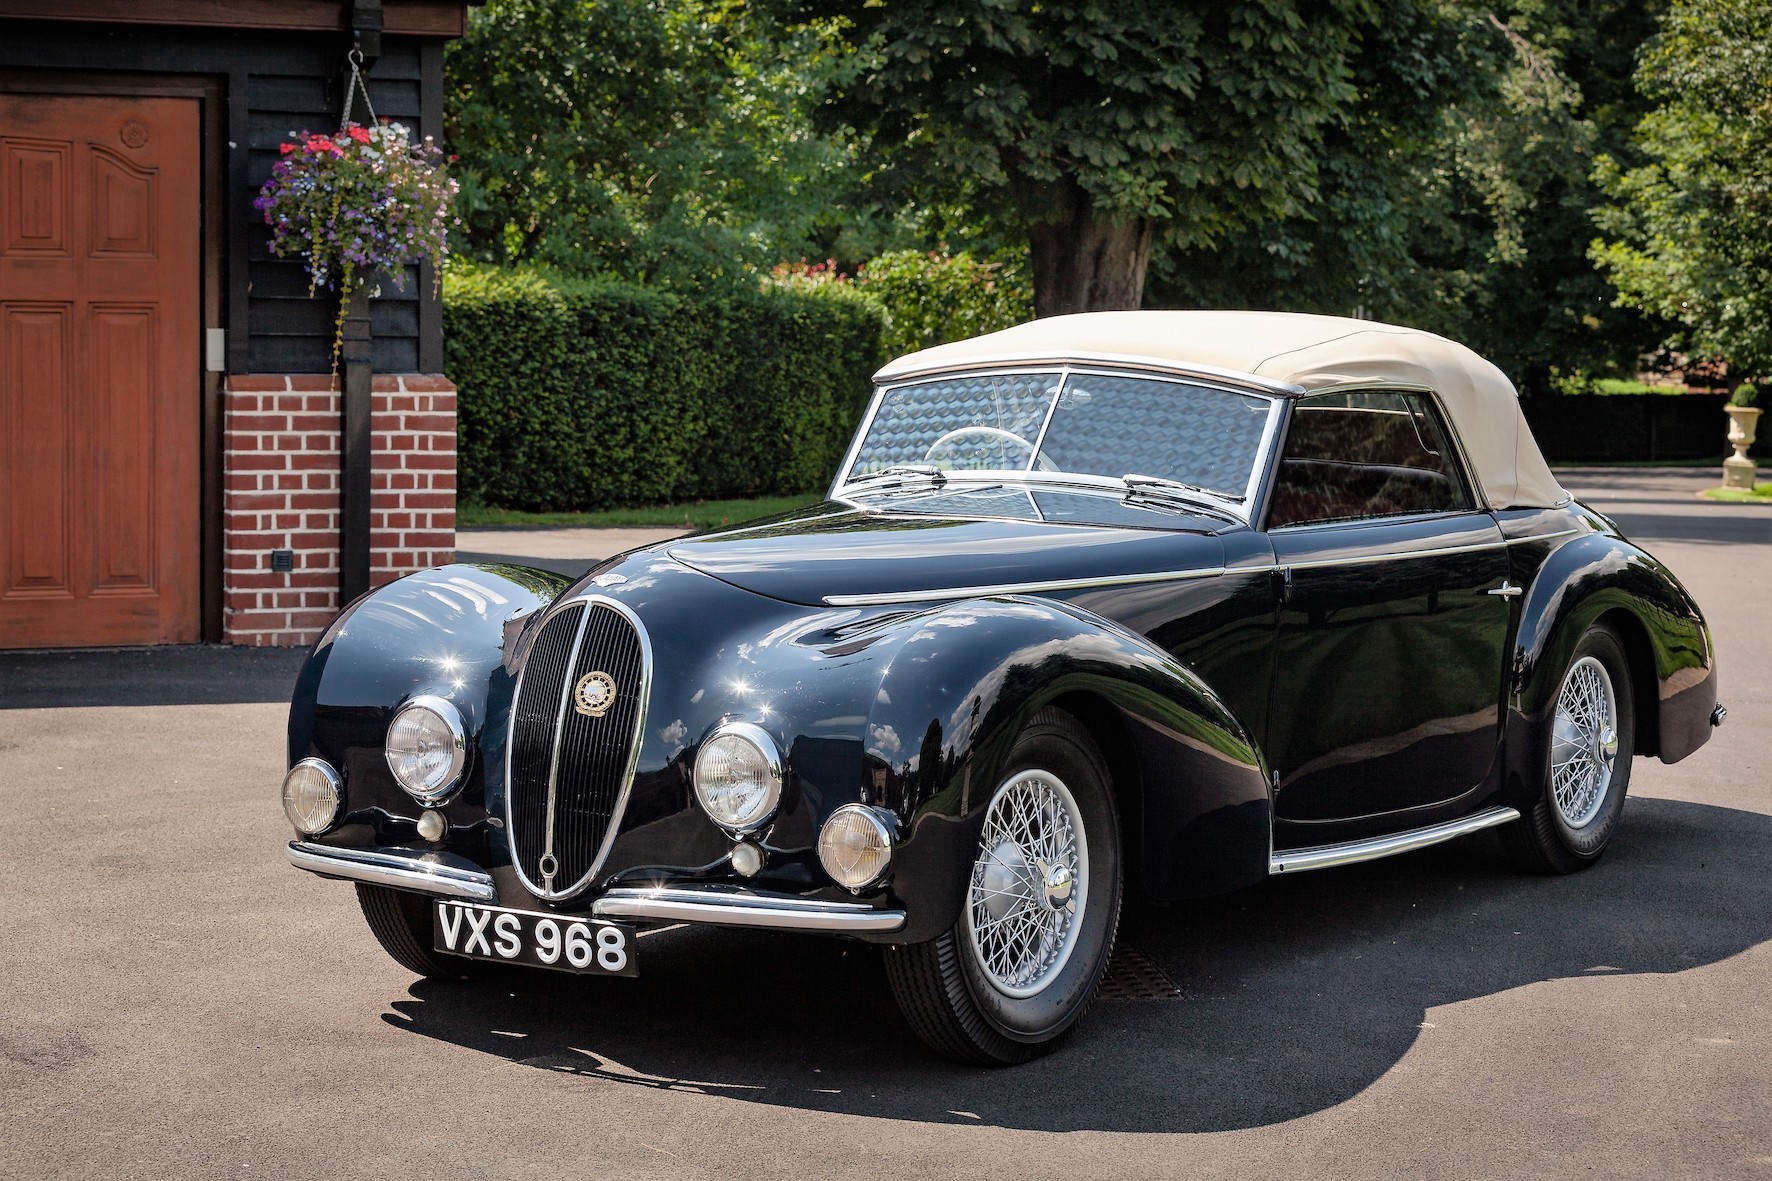 1946 Delahaye Type 135M Cabriolet for sale with H&H Classics Auction 8th September